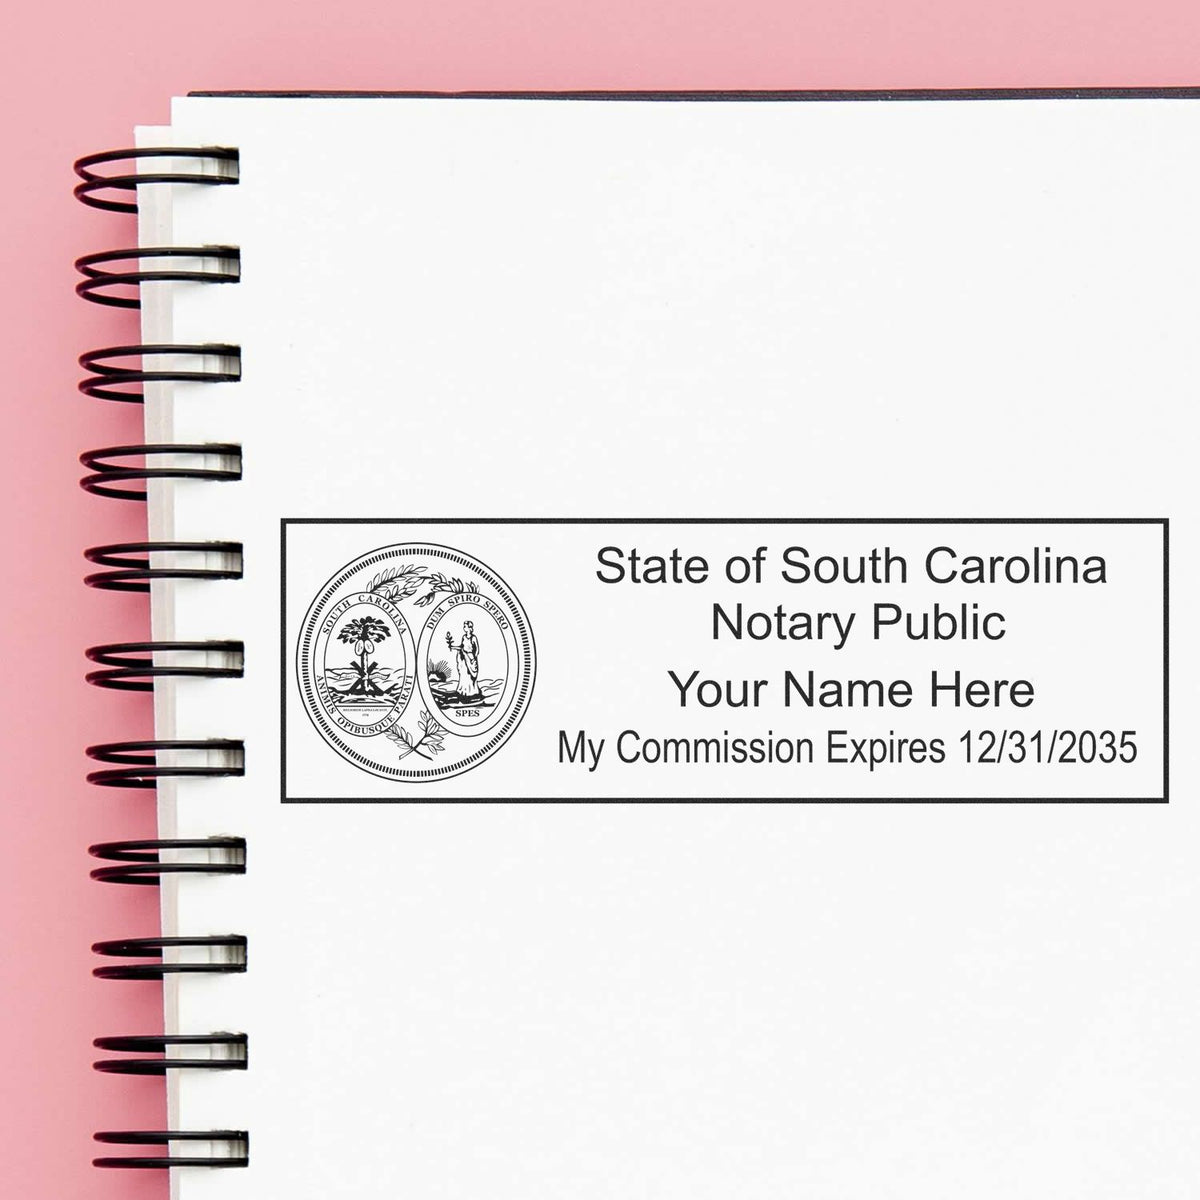 An alternative view of the PSI South Carolina Notary Stamp stamped on a sheet of paper showing the image in use